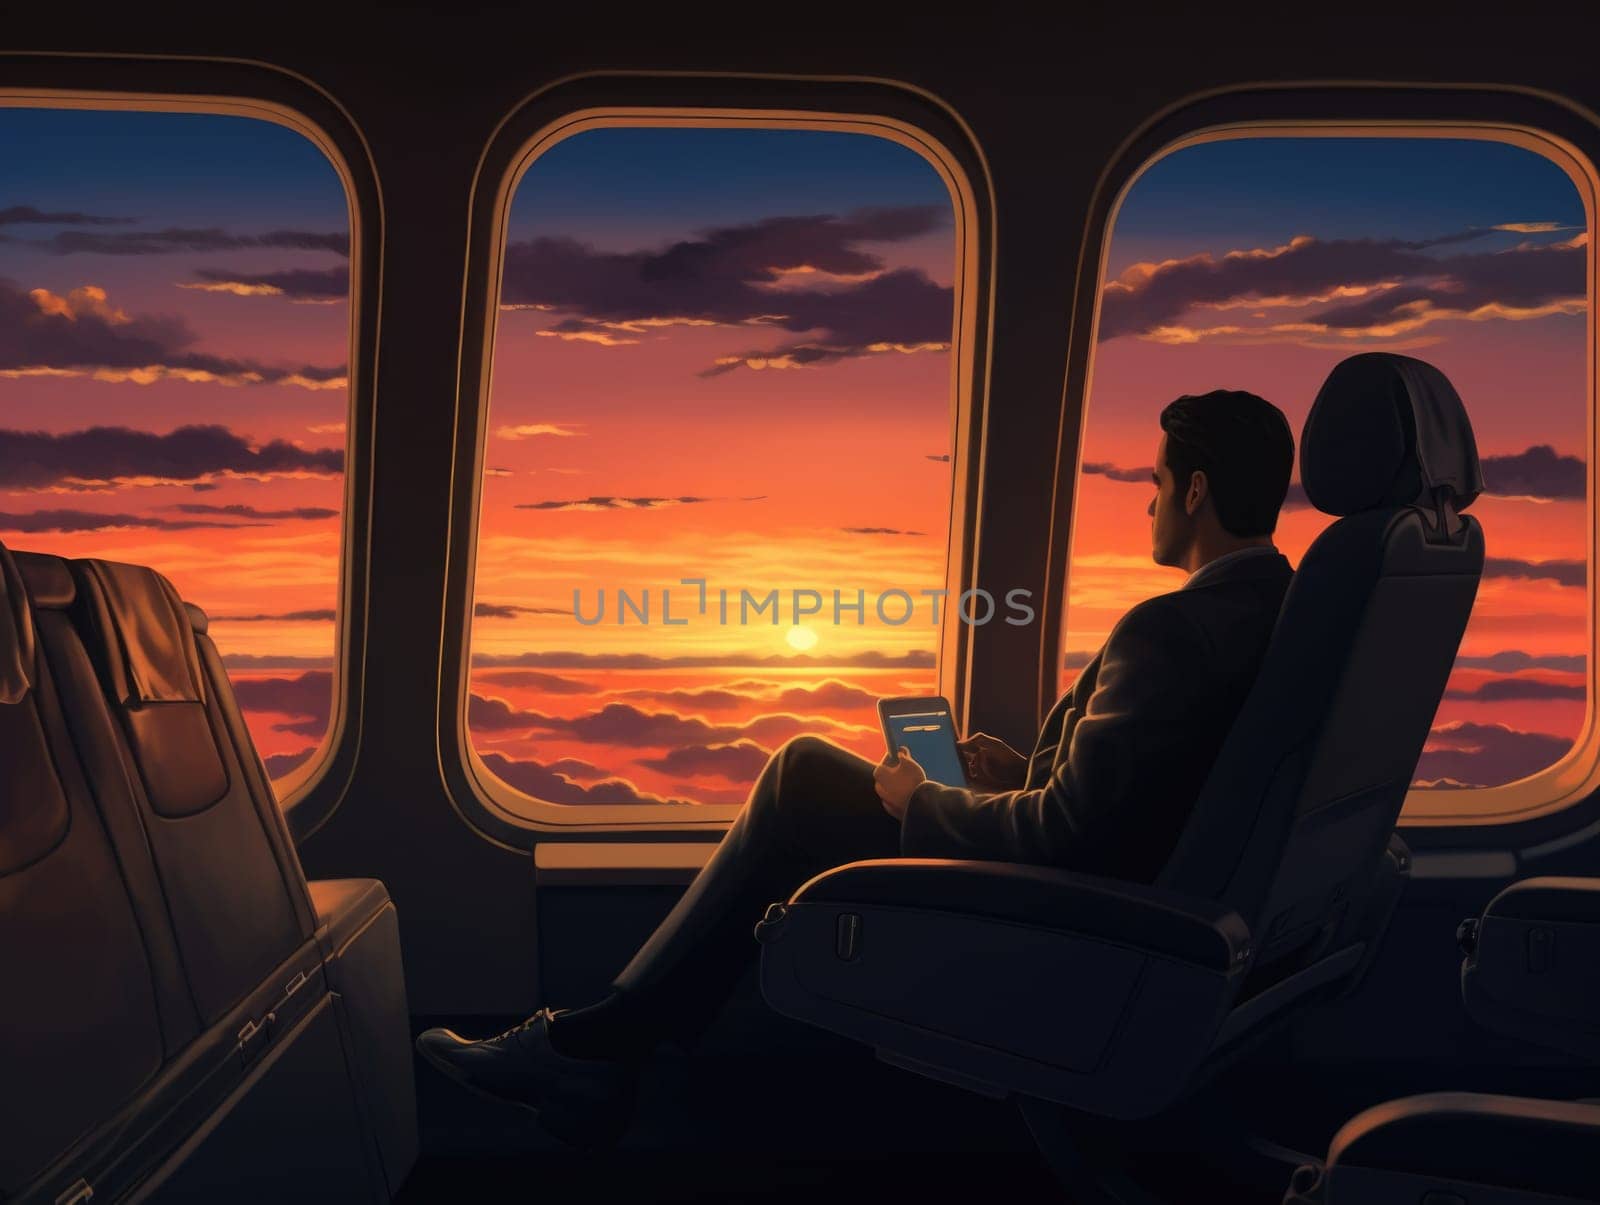 A male businessman enjoys the view of a stunning sunset from his seat inside the airplane.